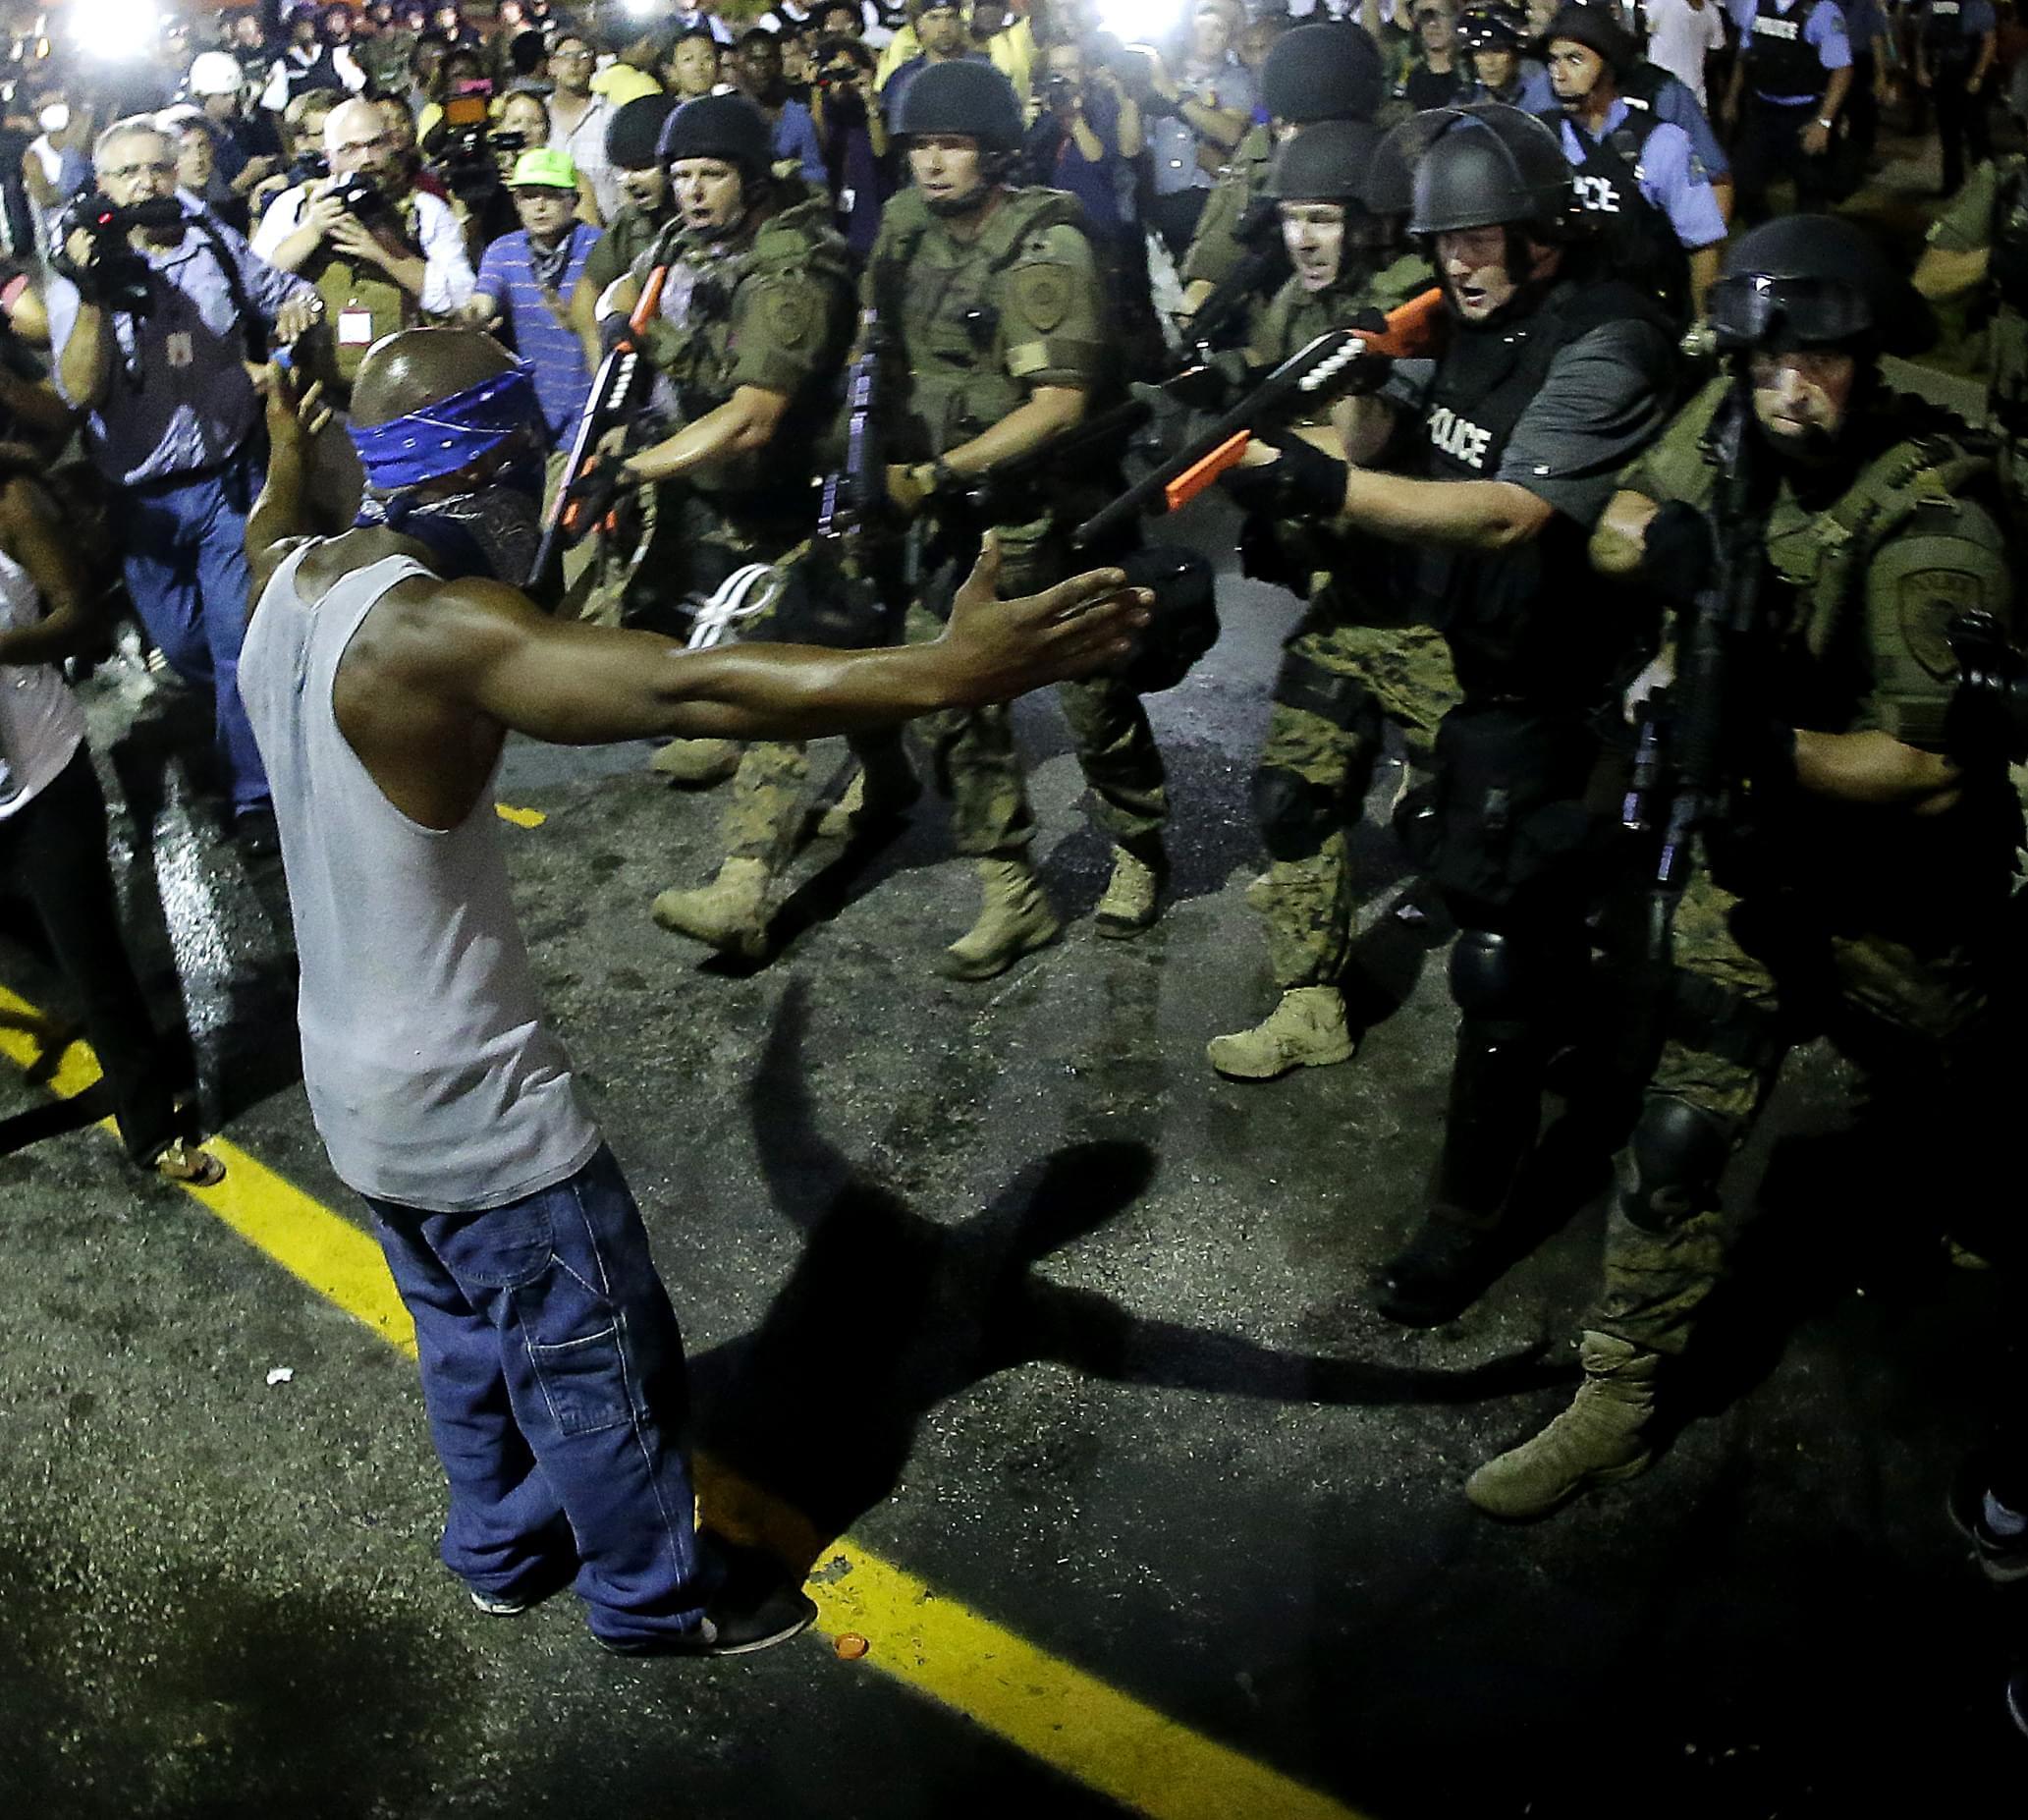 A black male is arrested by police during a protest following the shooting of unarmed, black teenager Michael Brown in Ferguson, MO.